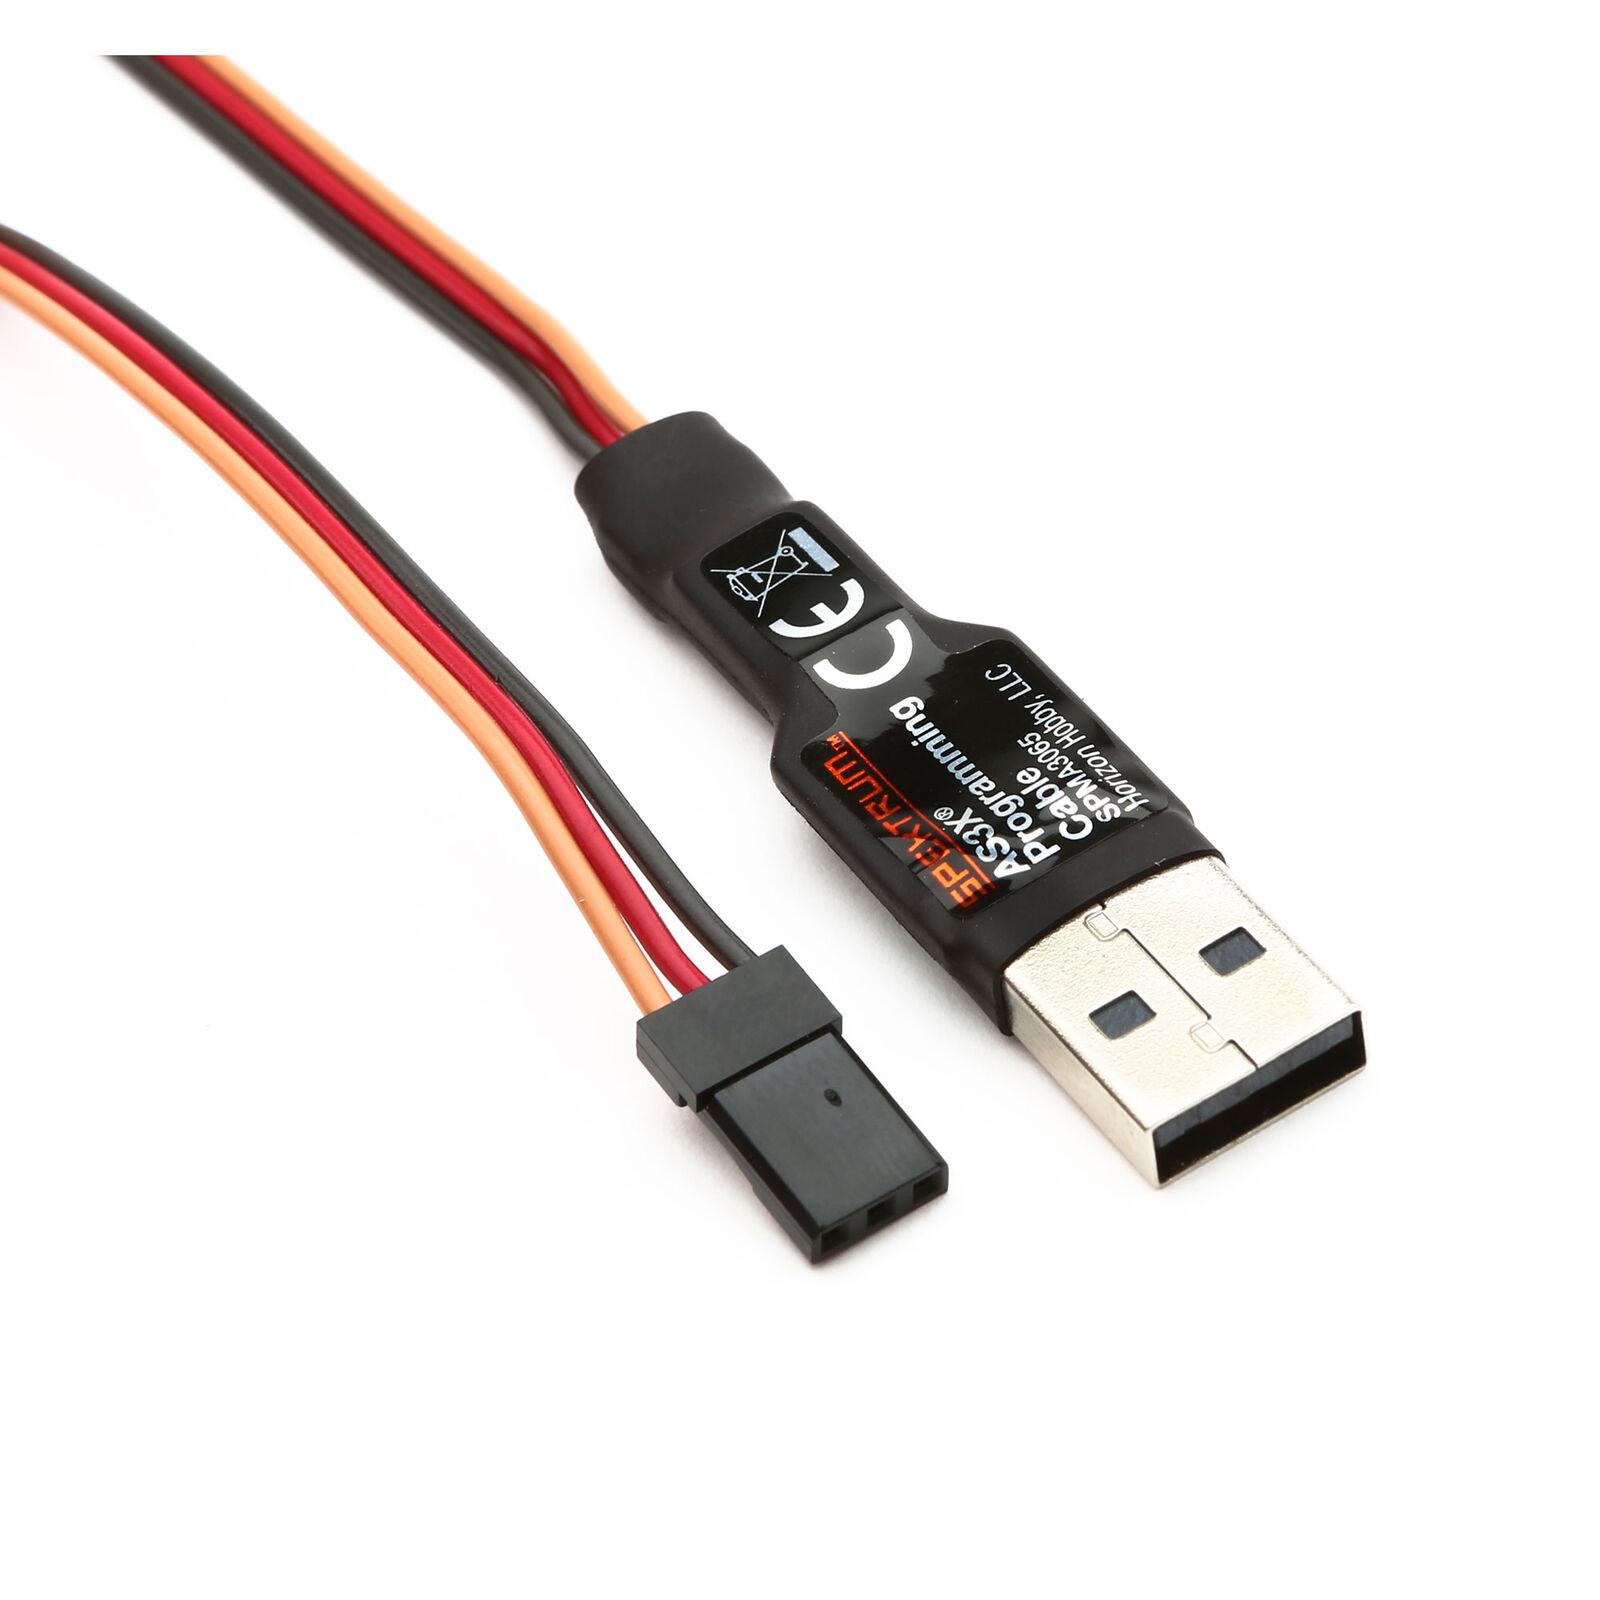 Transmitter/Receiver Program Cable: USB Interface